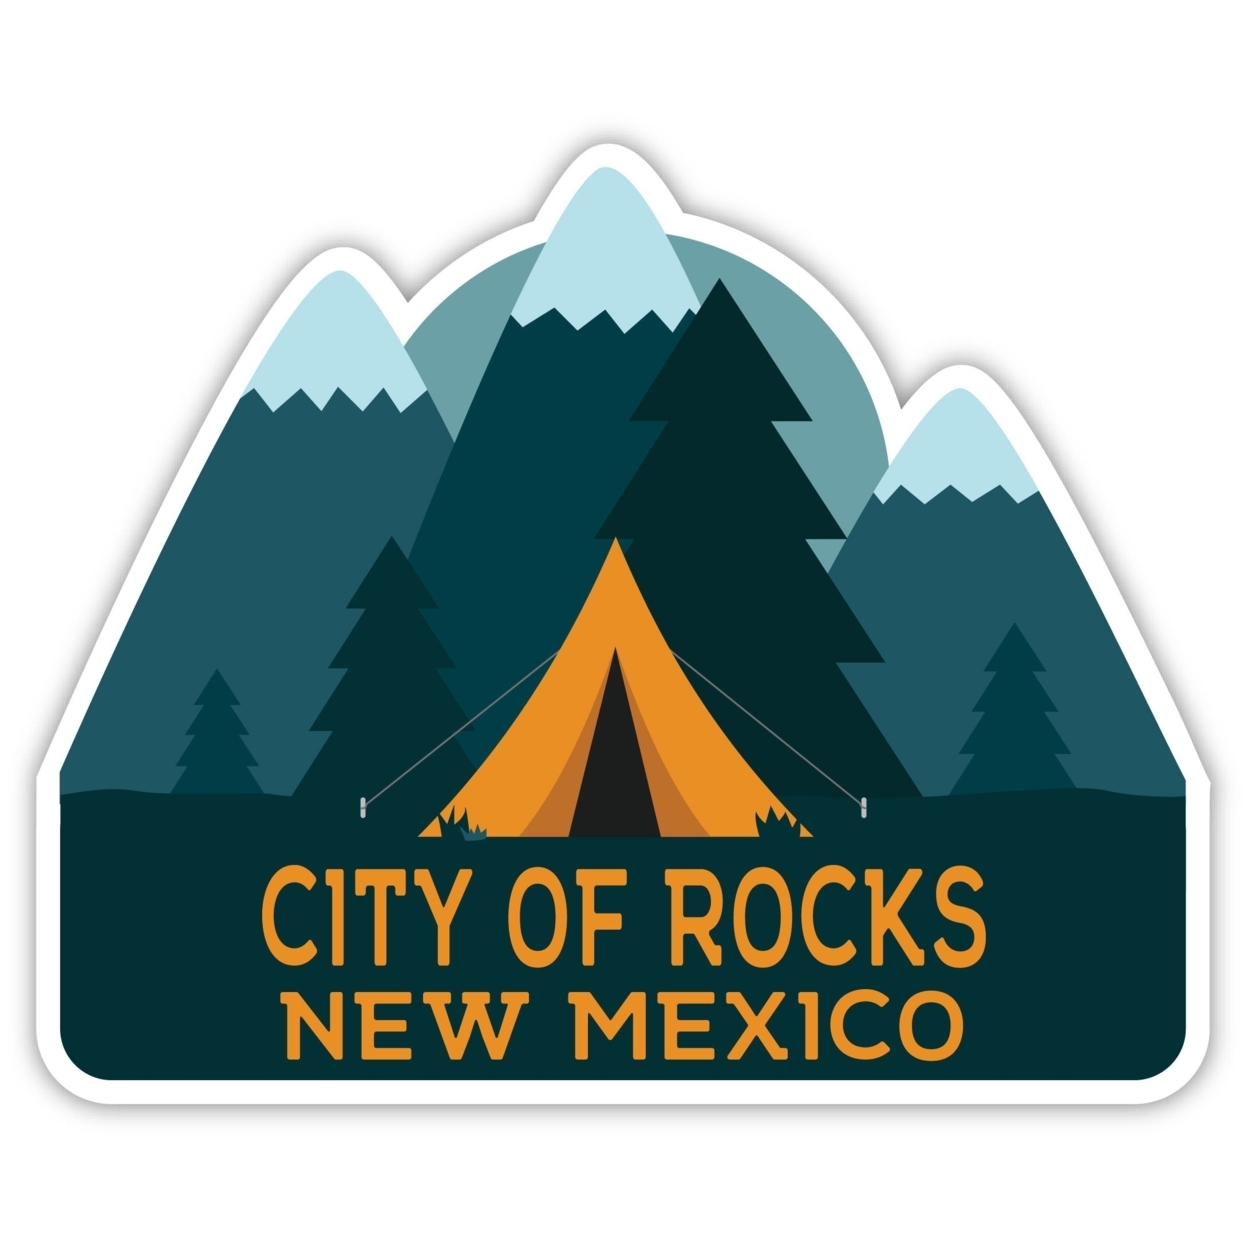 City Of Rocks New Mexico Souvenir Decorative Stickers (Choose Theme And Size) - 4-Pack, 8-Inch, Tent